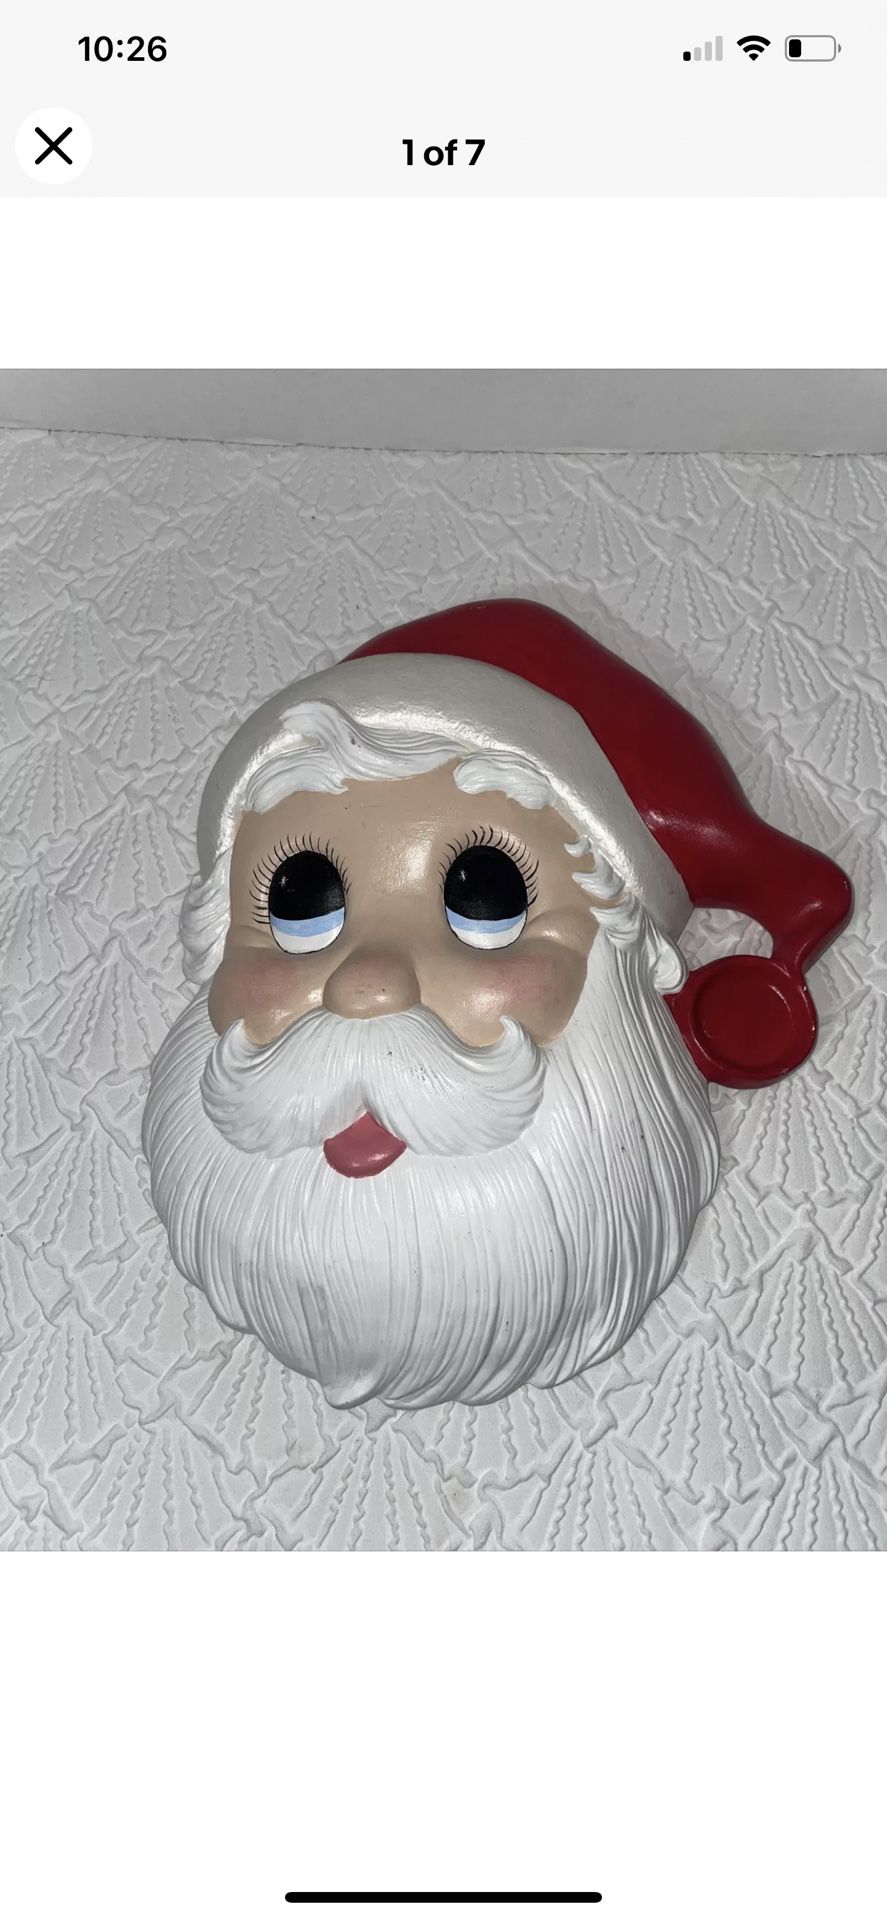 Vintage Christmas Wall Hanging/Centerpiece Ceramic Santa Head 14"Lx11"W In good vintage condition!! Has minor imperfections (please refer to detailed 